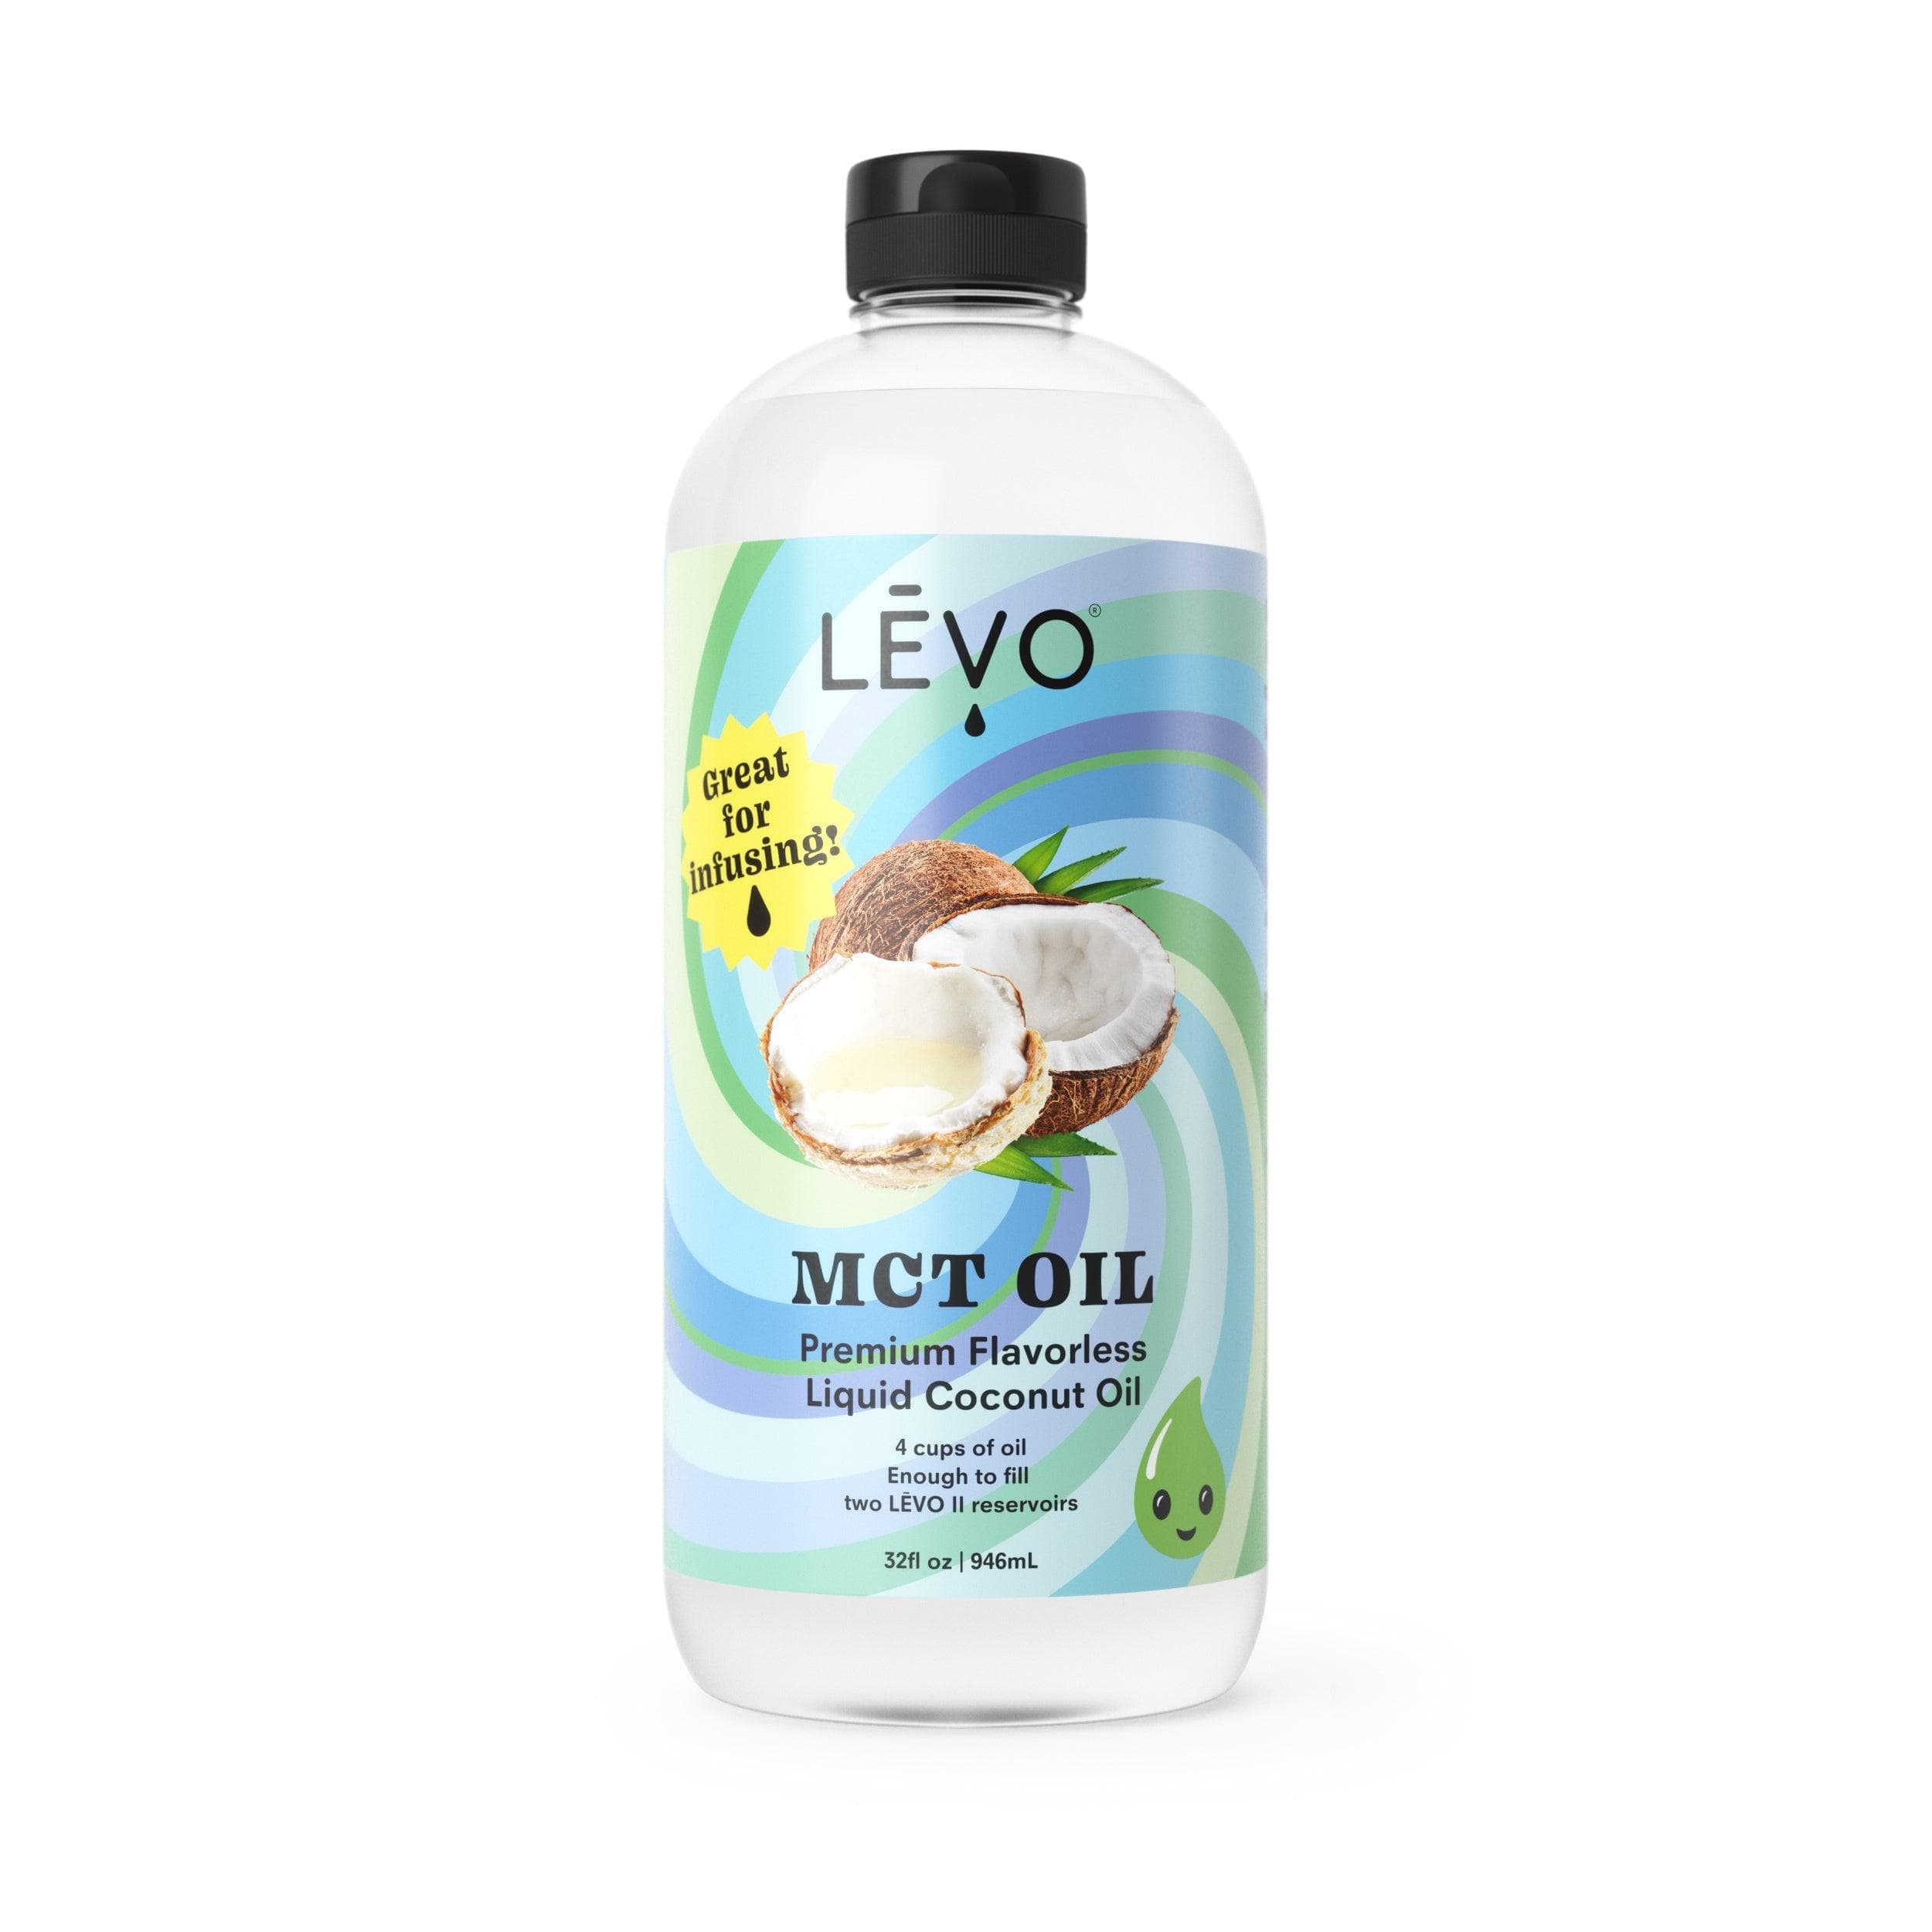 LĒVO MCT Oil 32 oz bottle. Infusion Precision at its Best - Embrace the power of LĒVO II and tCheck in one bundle.